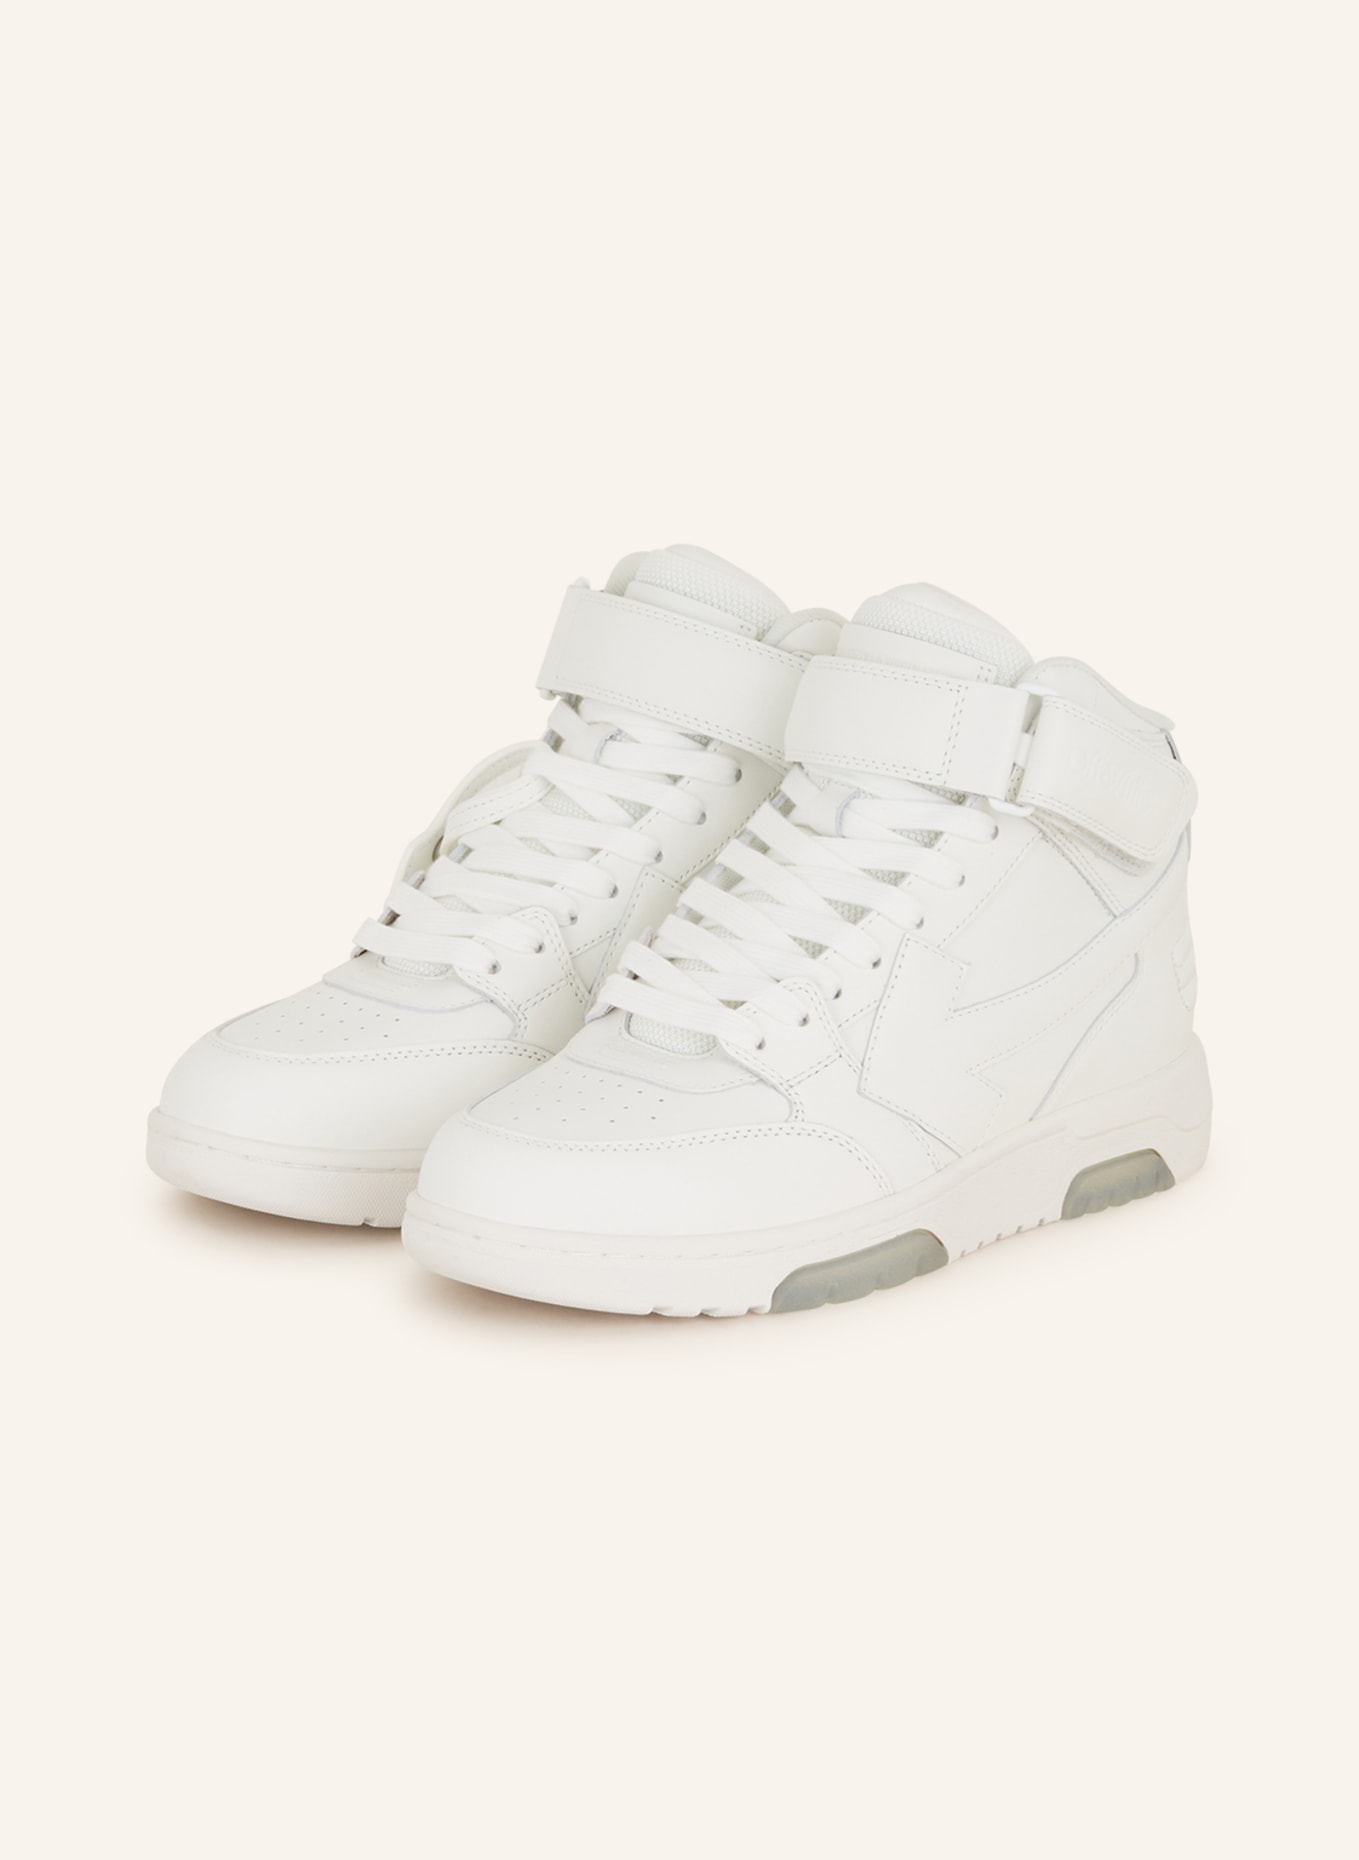 Off-White Hightop-Sneaker OUT OF OFFICE, Farbe: WEISS (Bild 1)